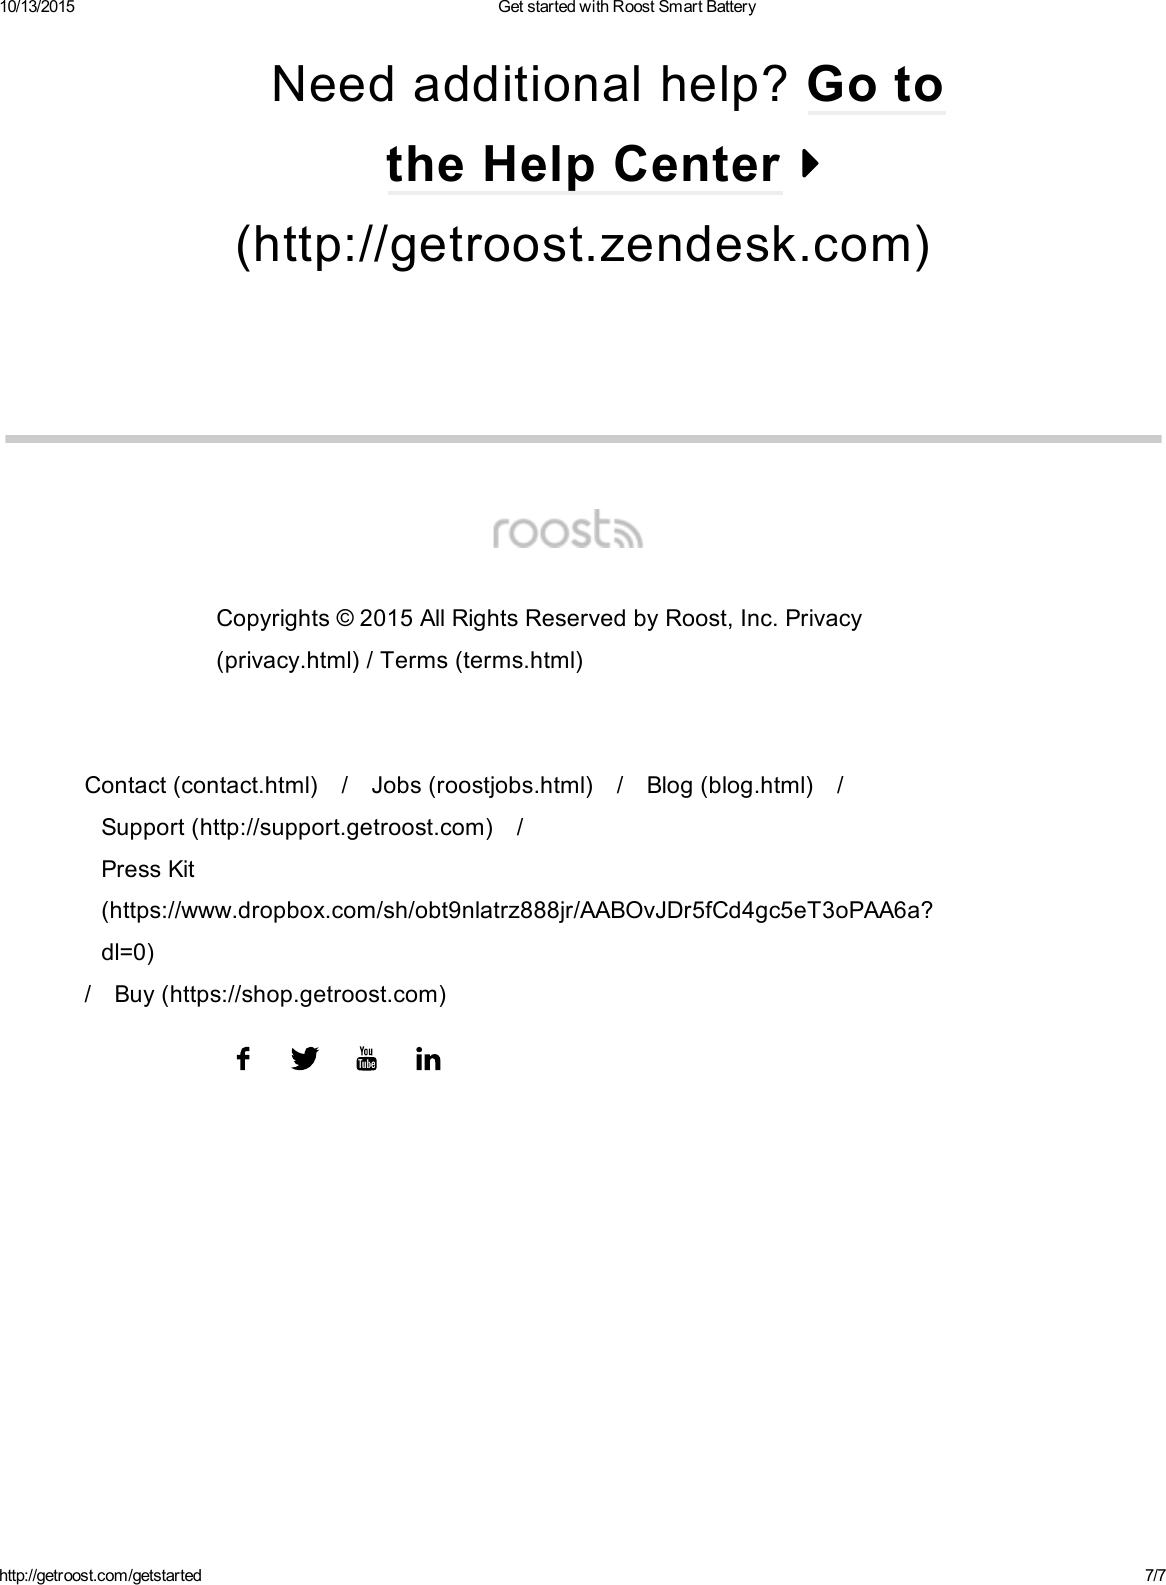 10/13/2015 GetstartedwithRoostSmartBatteryhttp://getroost.com/getstarted 7/7(http://getroost.zendesk.com)Needadditionalhelp?GototheHelpCenterContact(contact.html) / Jobs(roostjobs.html) / Blog(blog.html) /Support(http://support.getroost.com) /PressKit(https://www.dropbox.com/sh/obt9nlatrz888jr/AABOvJDr5fCd4gc5eT3oPAA6a?dl=0)/ Buy(https://shop.getroost.com)Copyrights©2015AllRightsReservedbyRoost,Inc.Privacy(privacy.html)/Terms(terms.html)